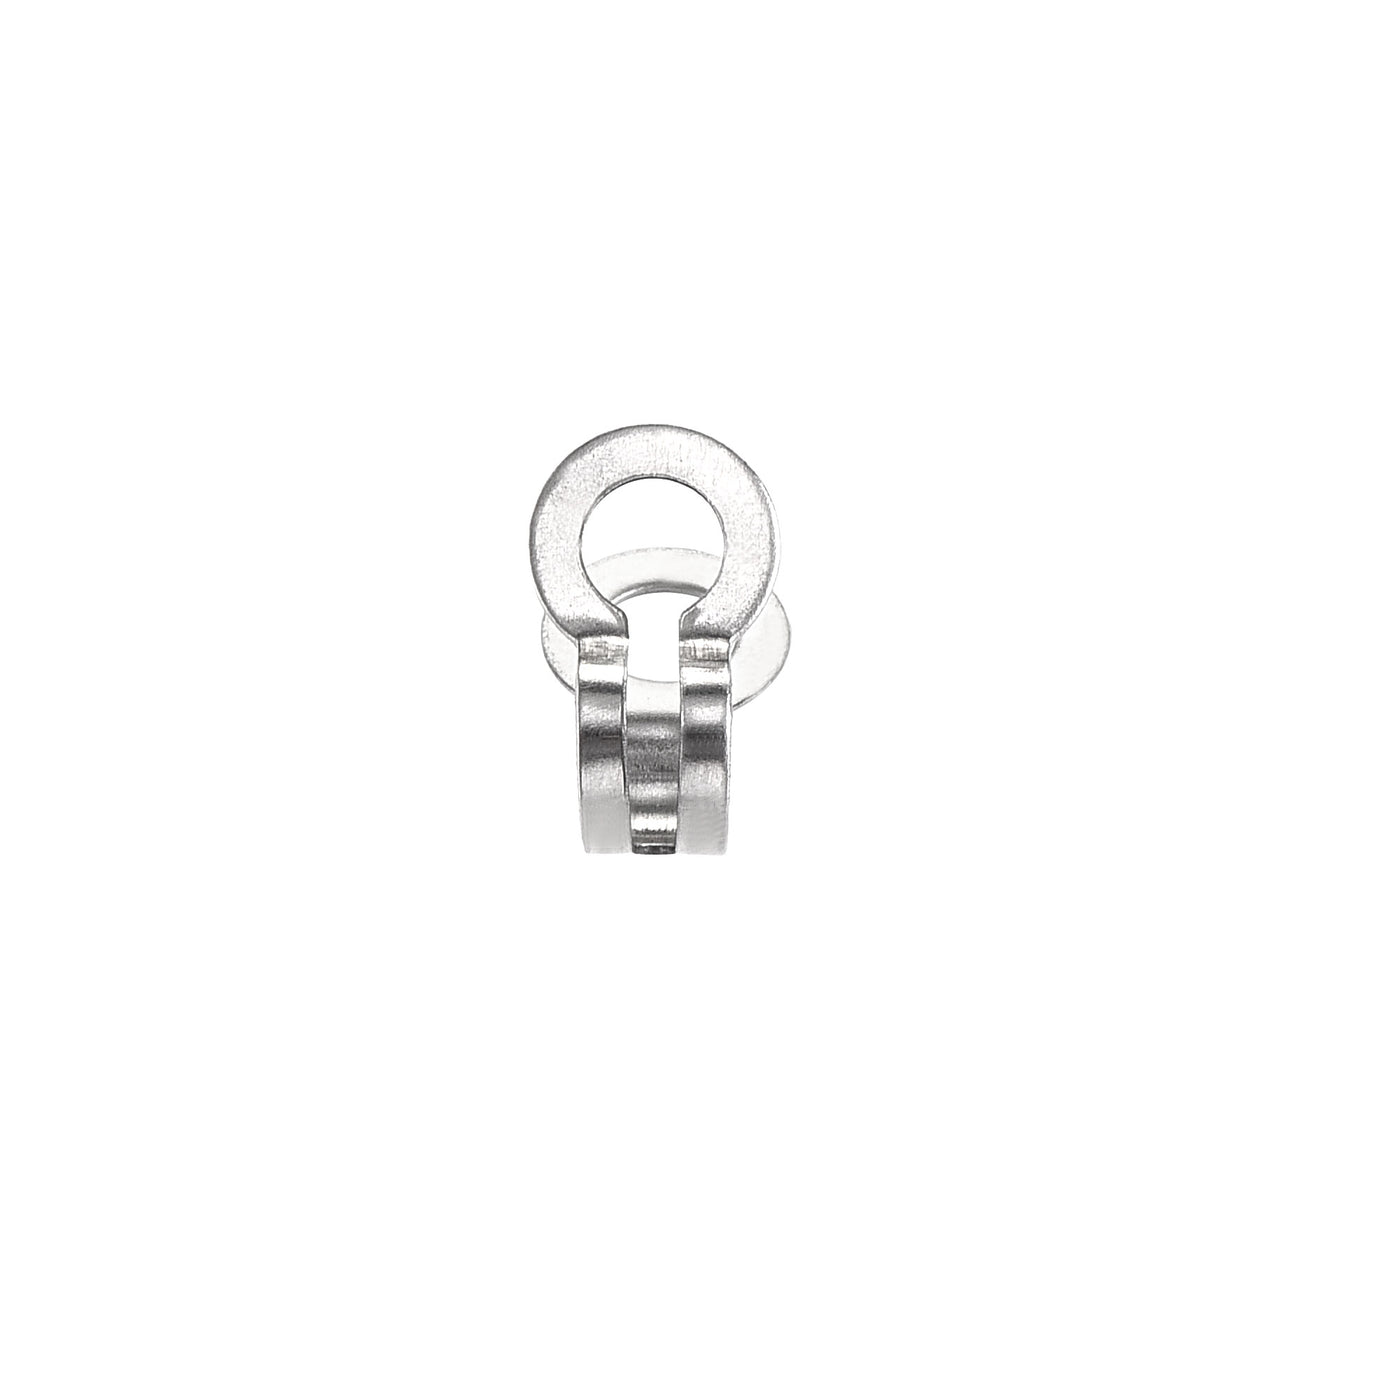 uxcell Uxcell Ball Chain Connector, 3mm 3.2mm Double Ring Style Link Stainless Steel Loop Connection, Pack of 50